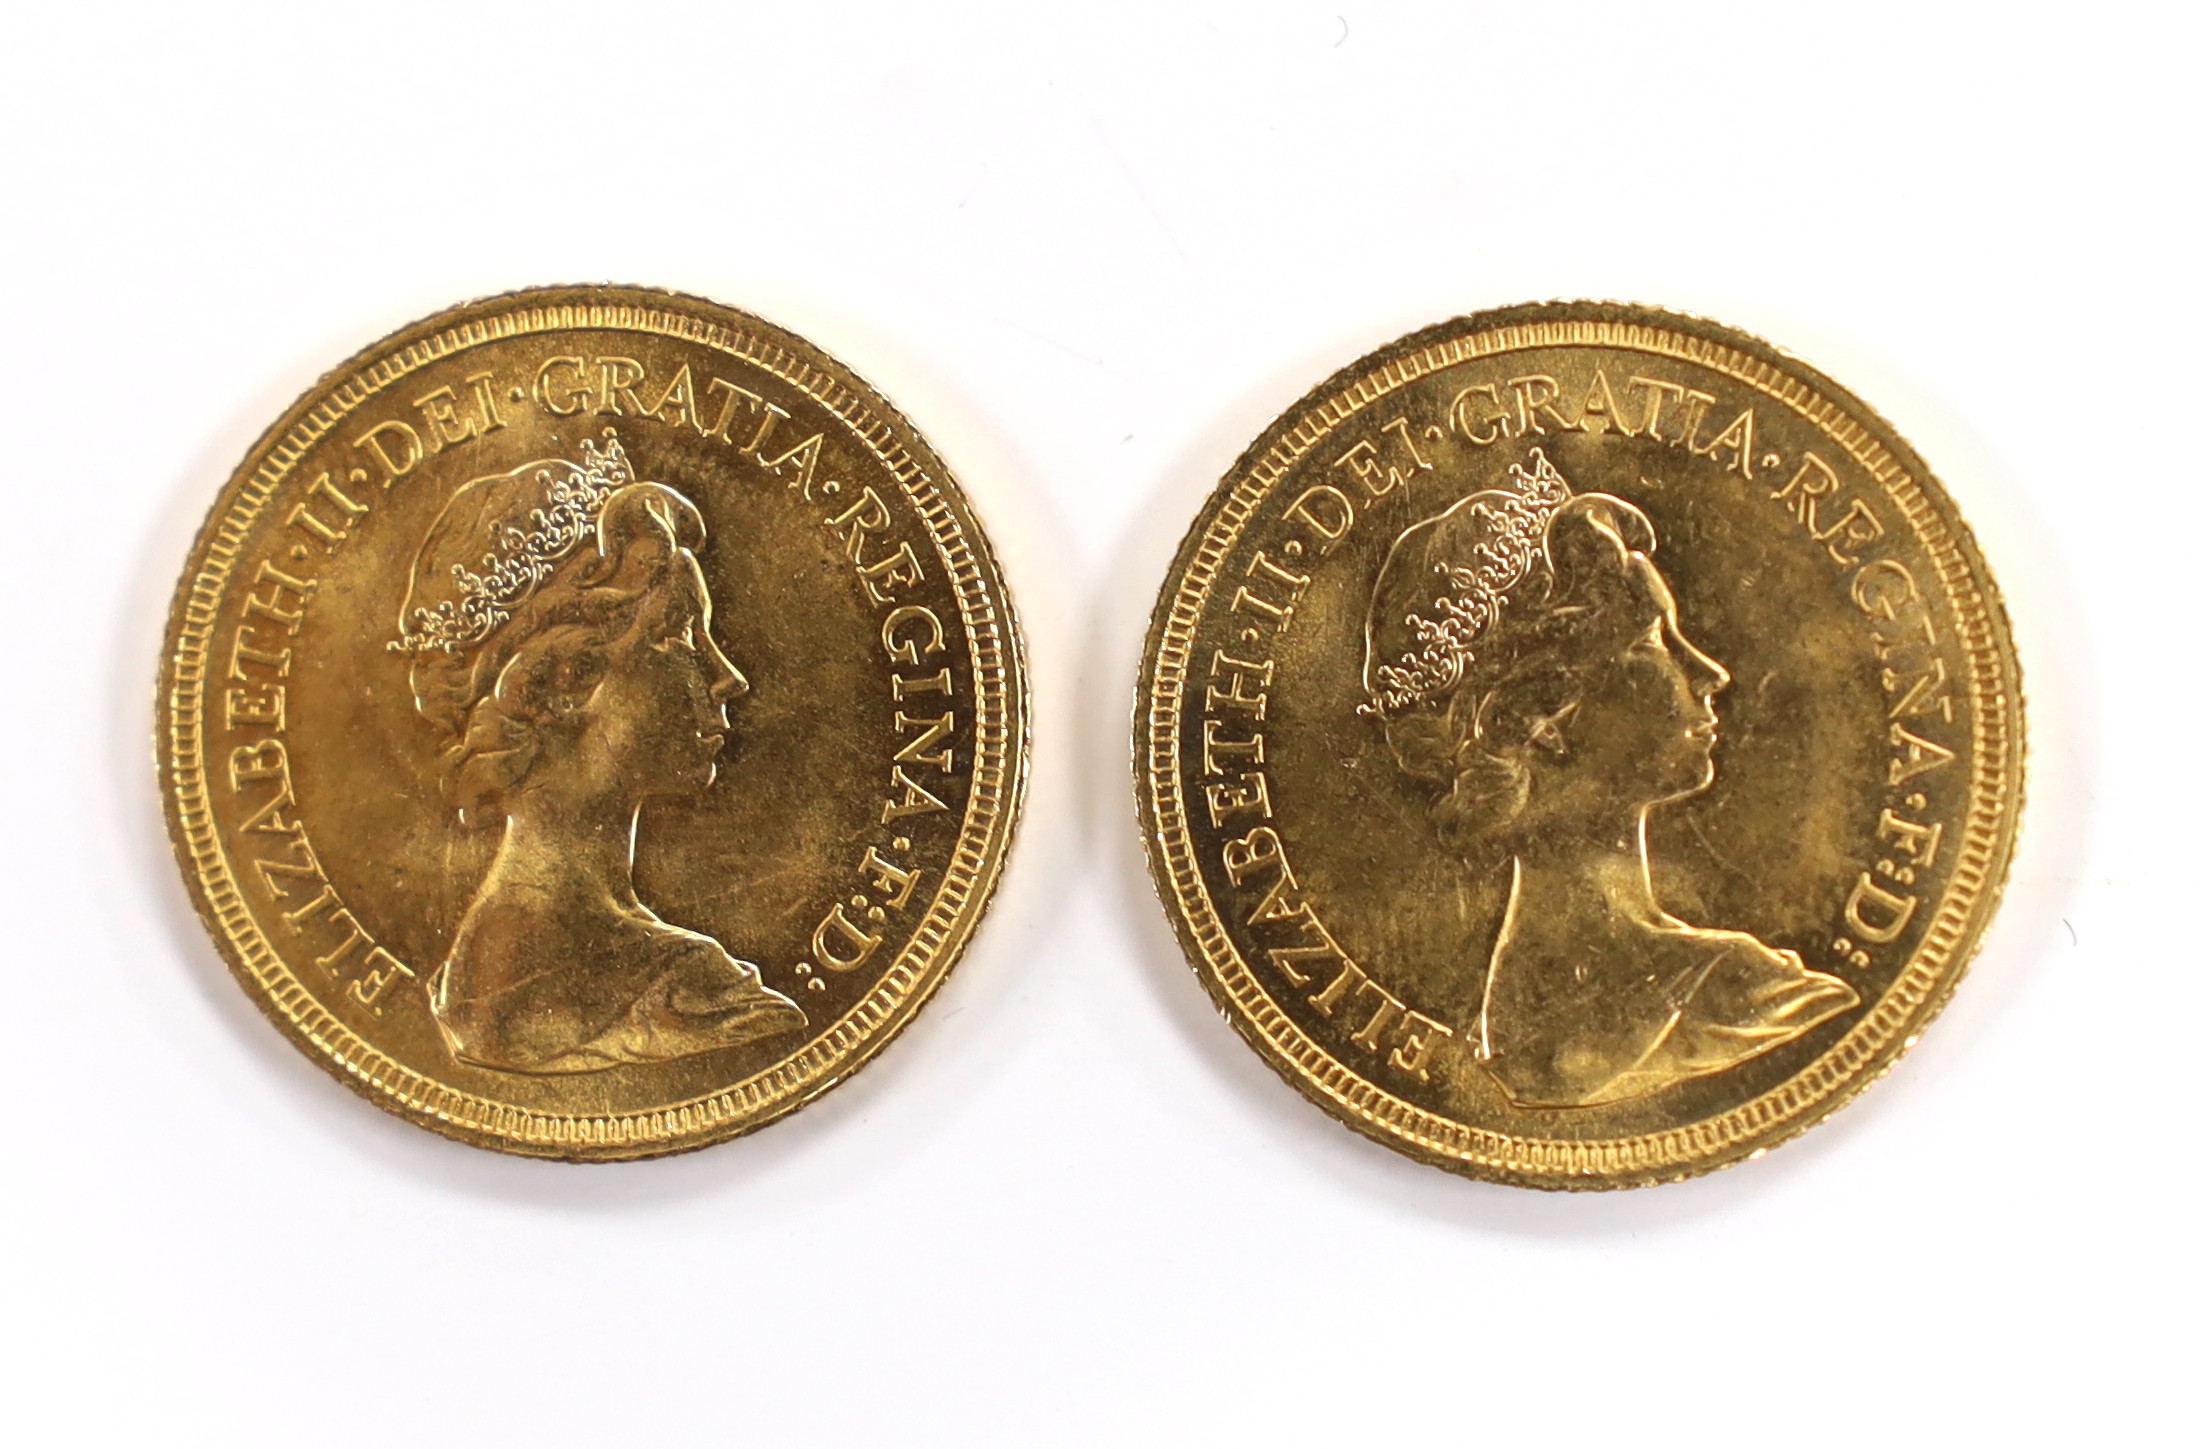 British gold coins - Two QEII gold sovereigns, 1974, near UNC, (S4204) - Image 2 of 2